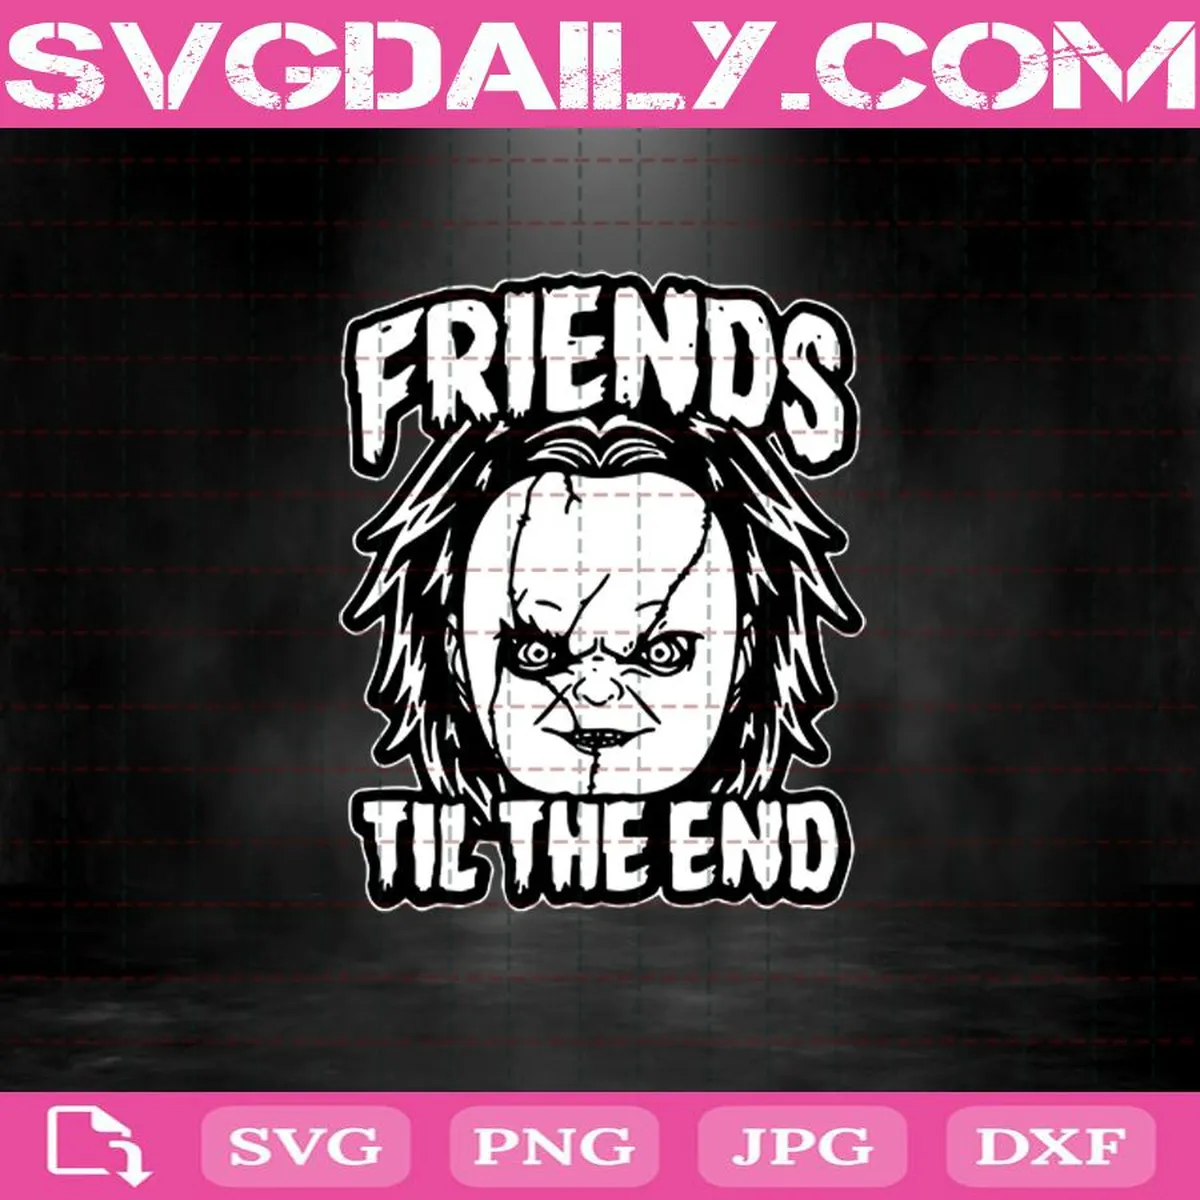 Chucky Friends Til The End Childs Play Svg, Bride Of Chucky Svg, Horror Movies Svg, Halloween Svg